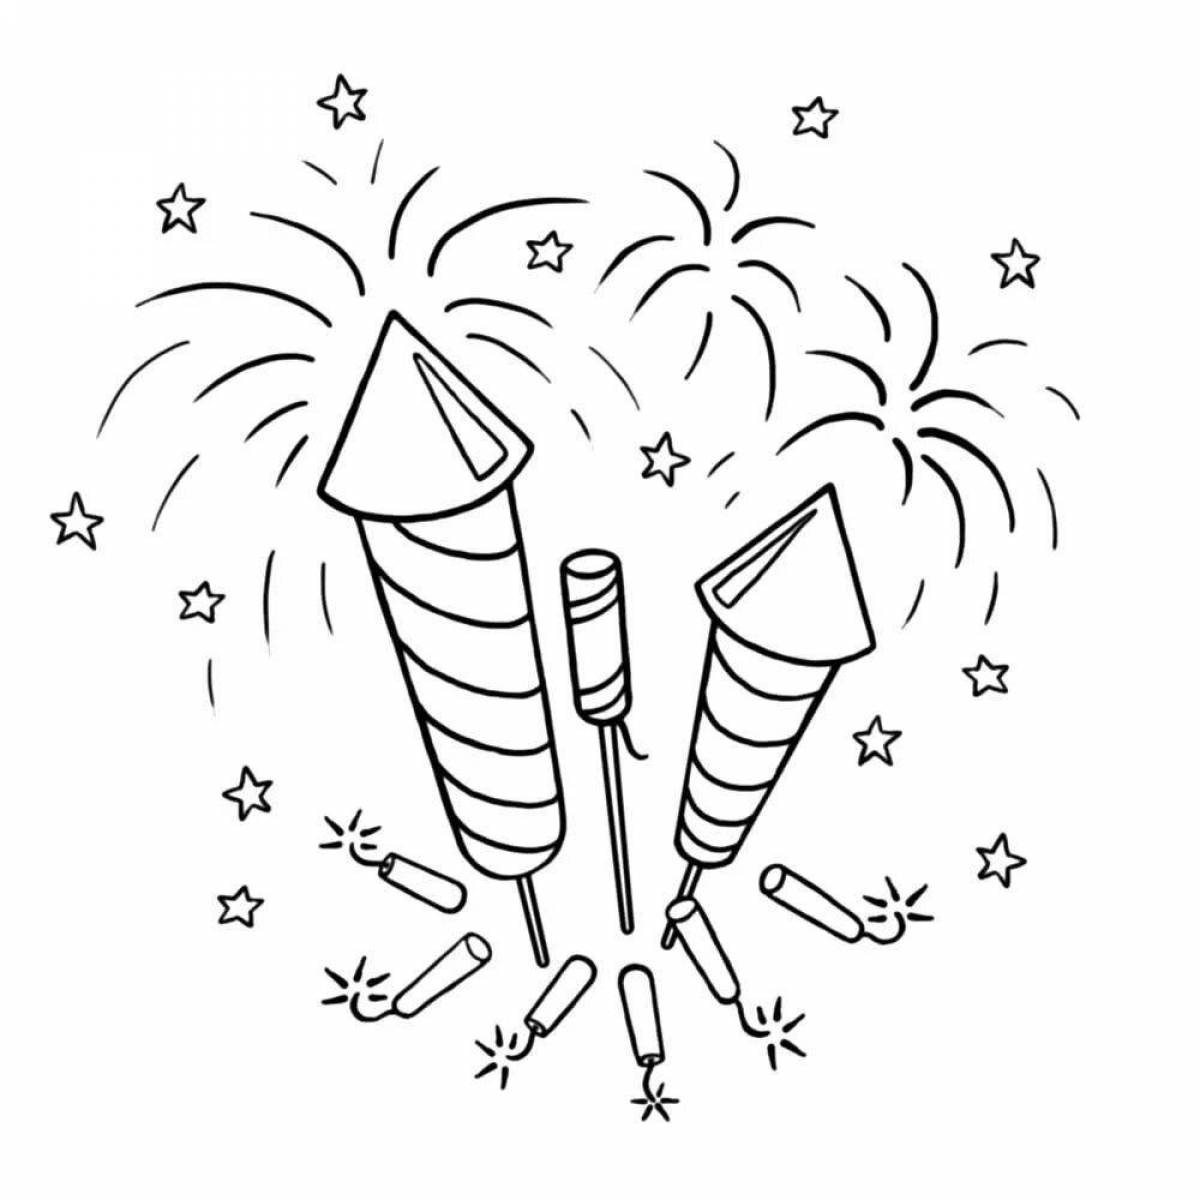 Great fireworks coloring book for kids